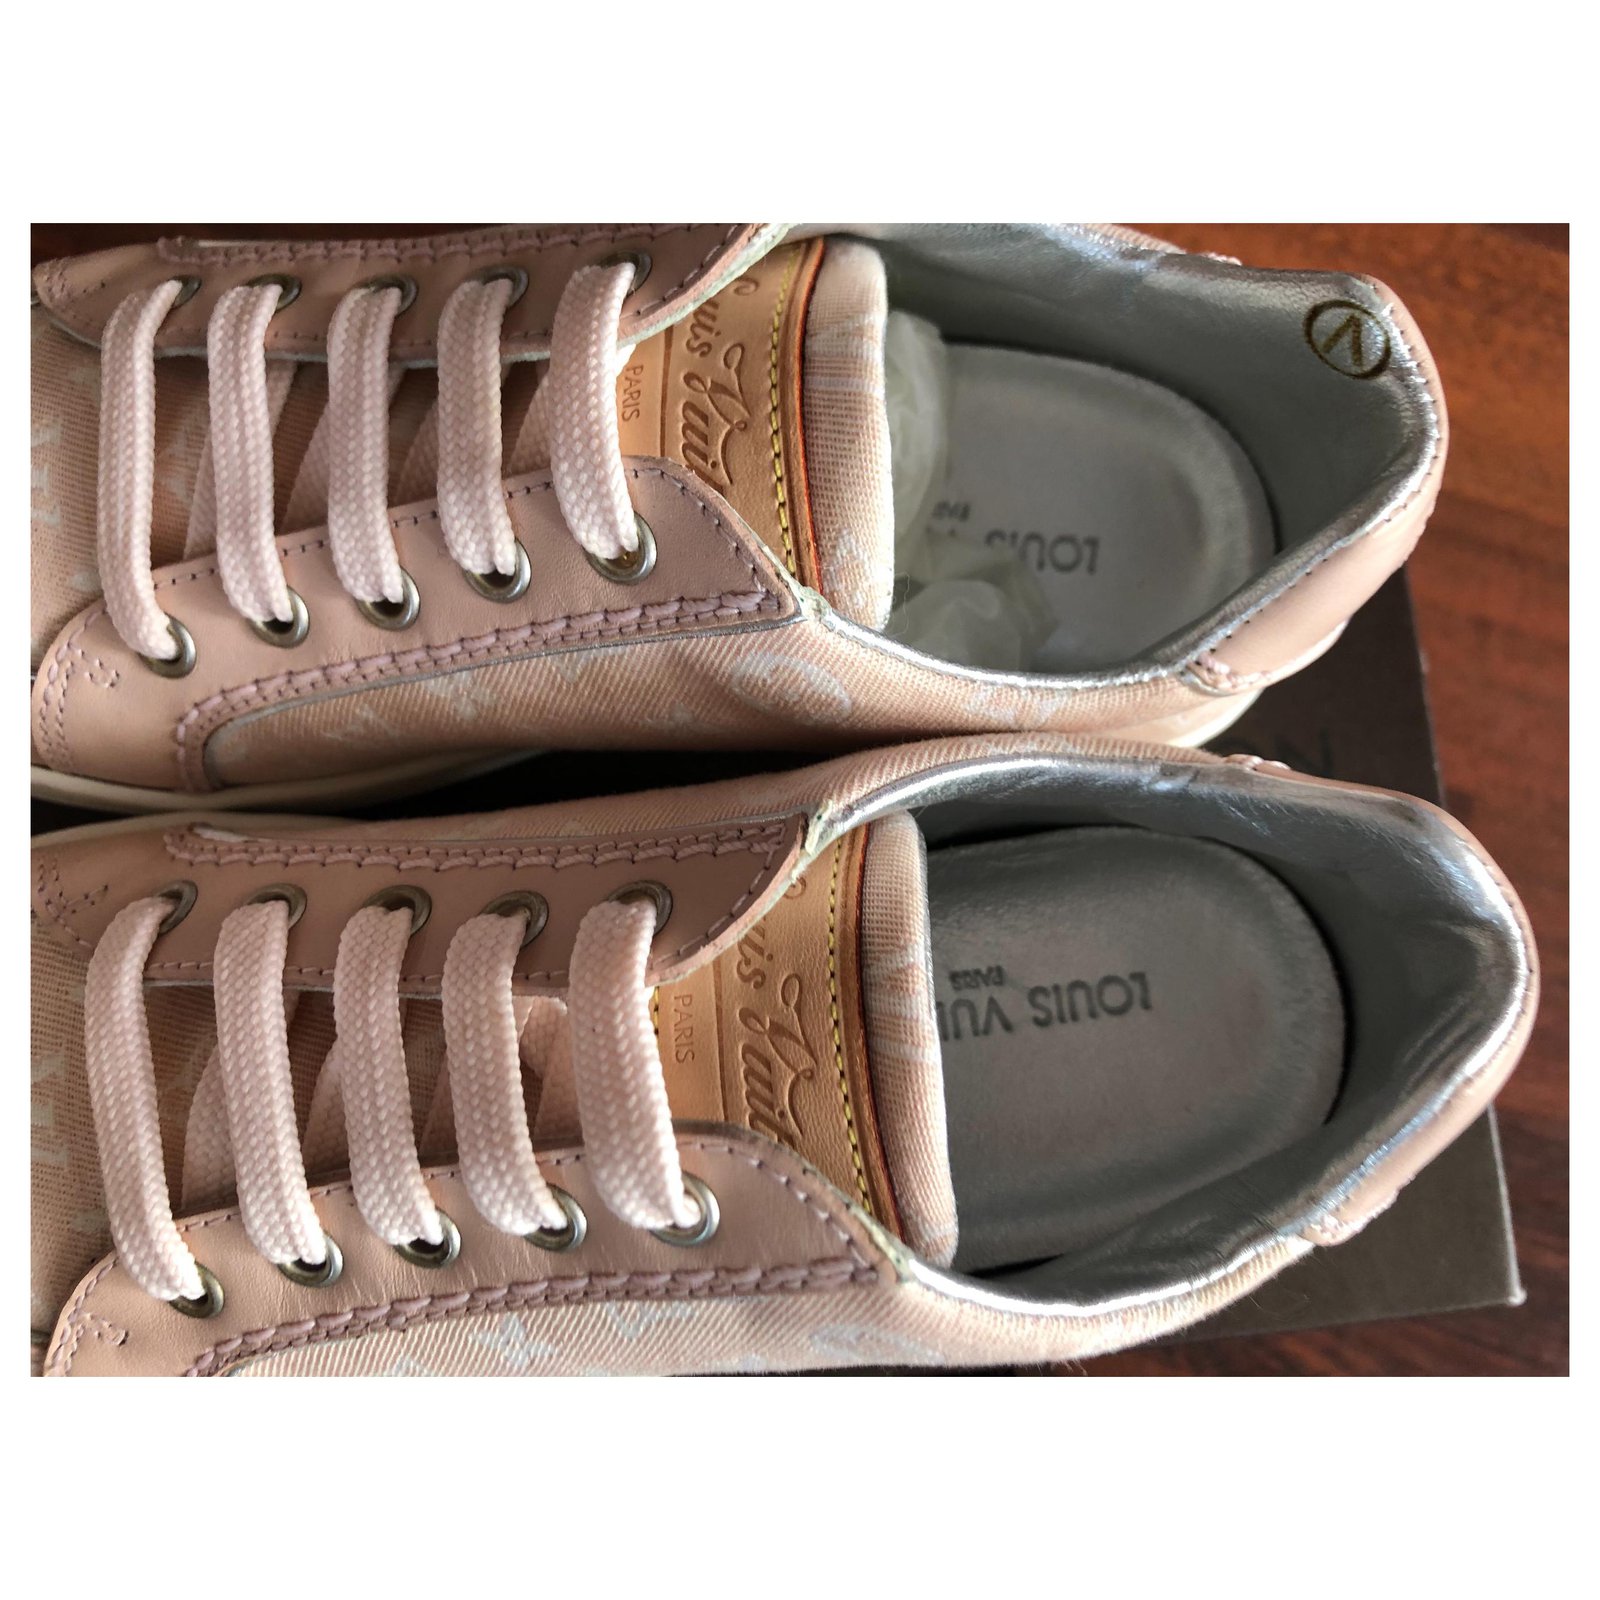 Louis Vuitton Sneakers Pink Leather Cloth Elastane ref.113891